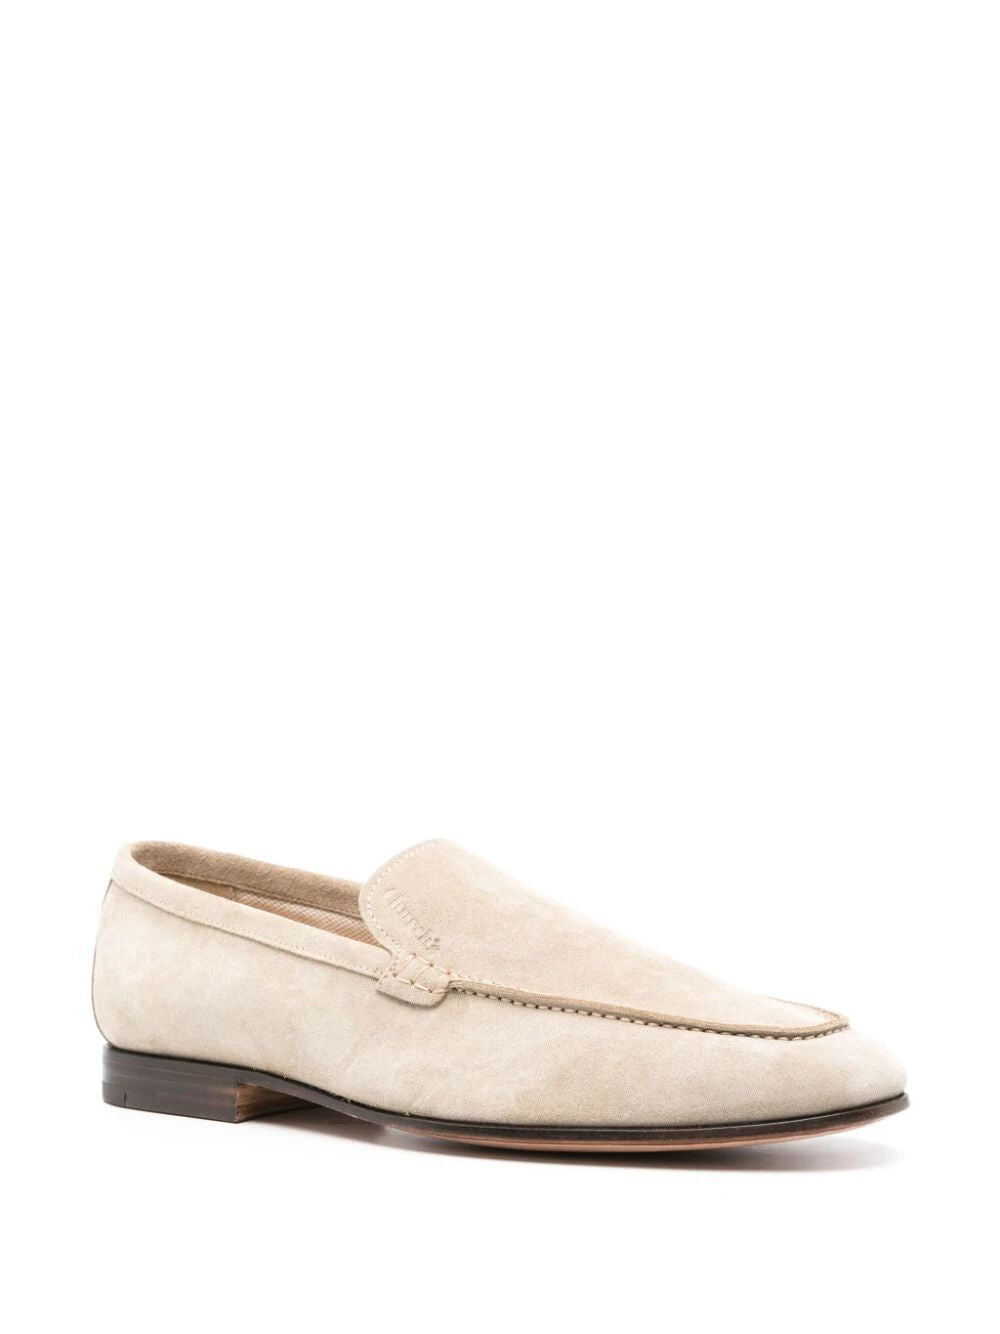 CHURCH'S Tan Calf Leather Moccasins for Men